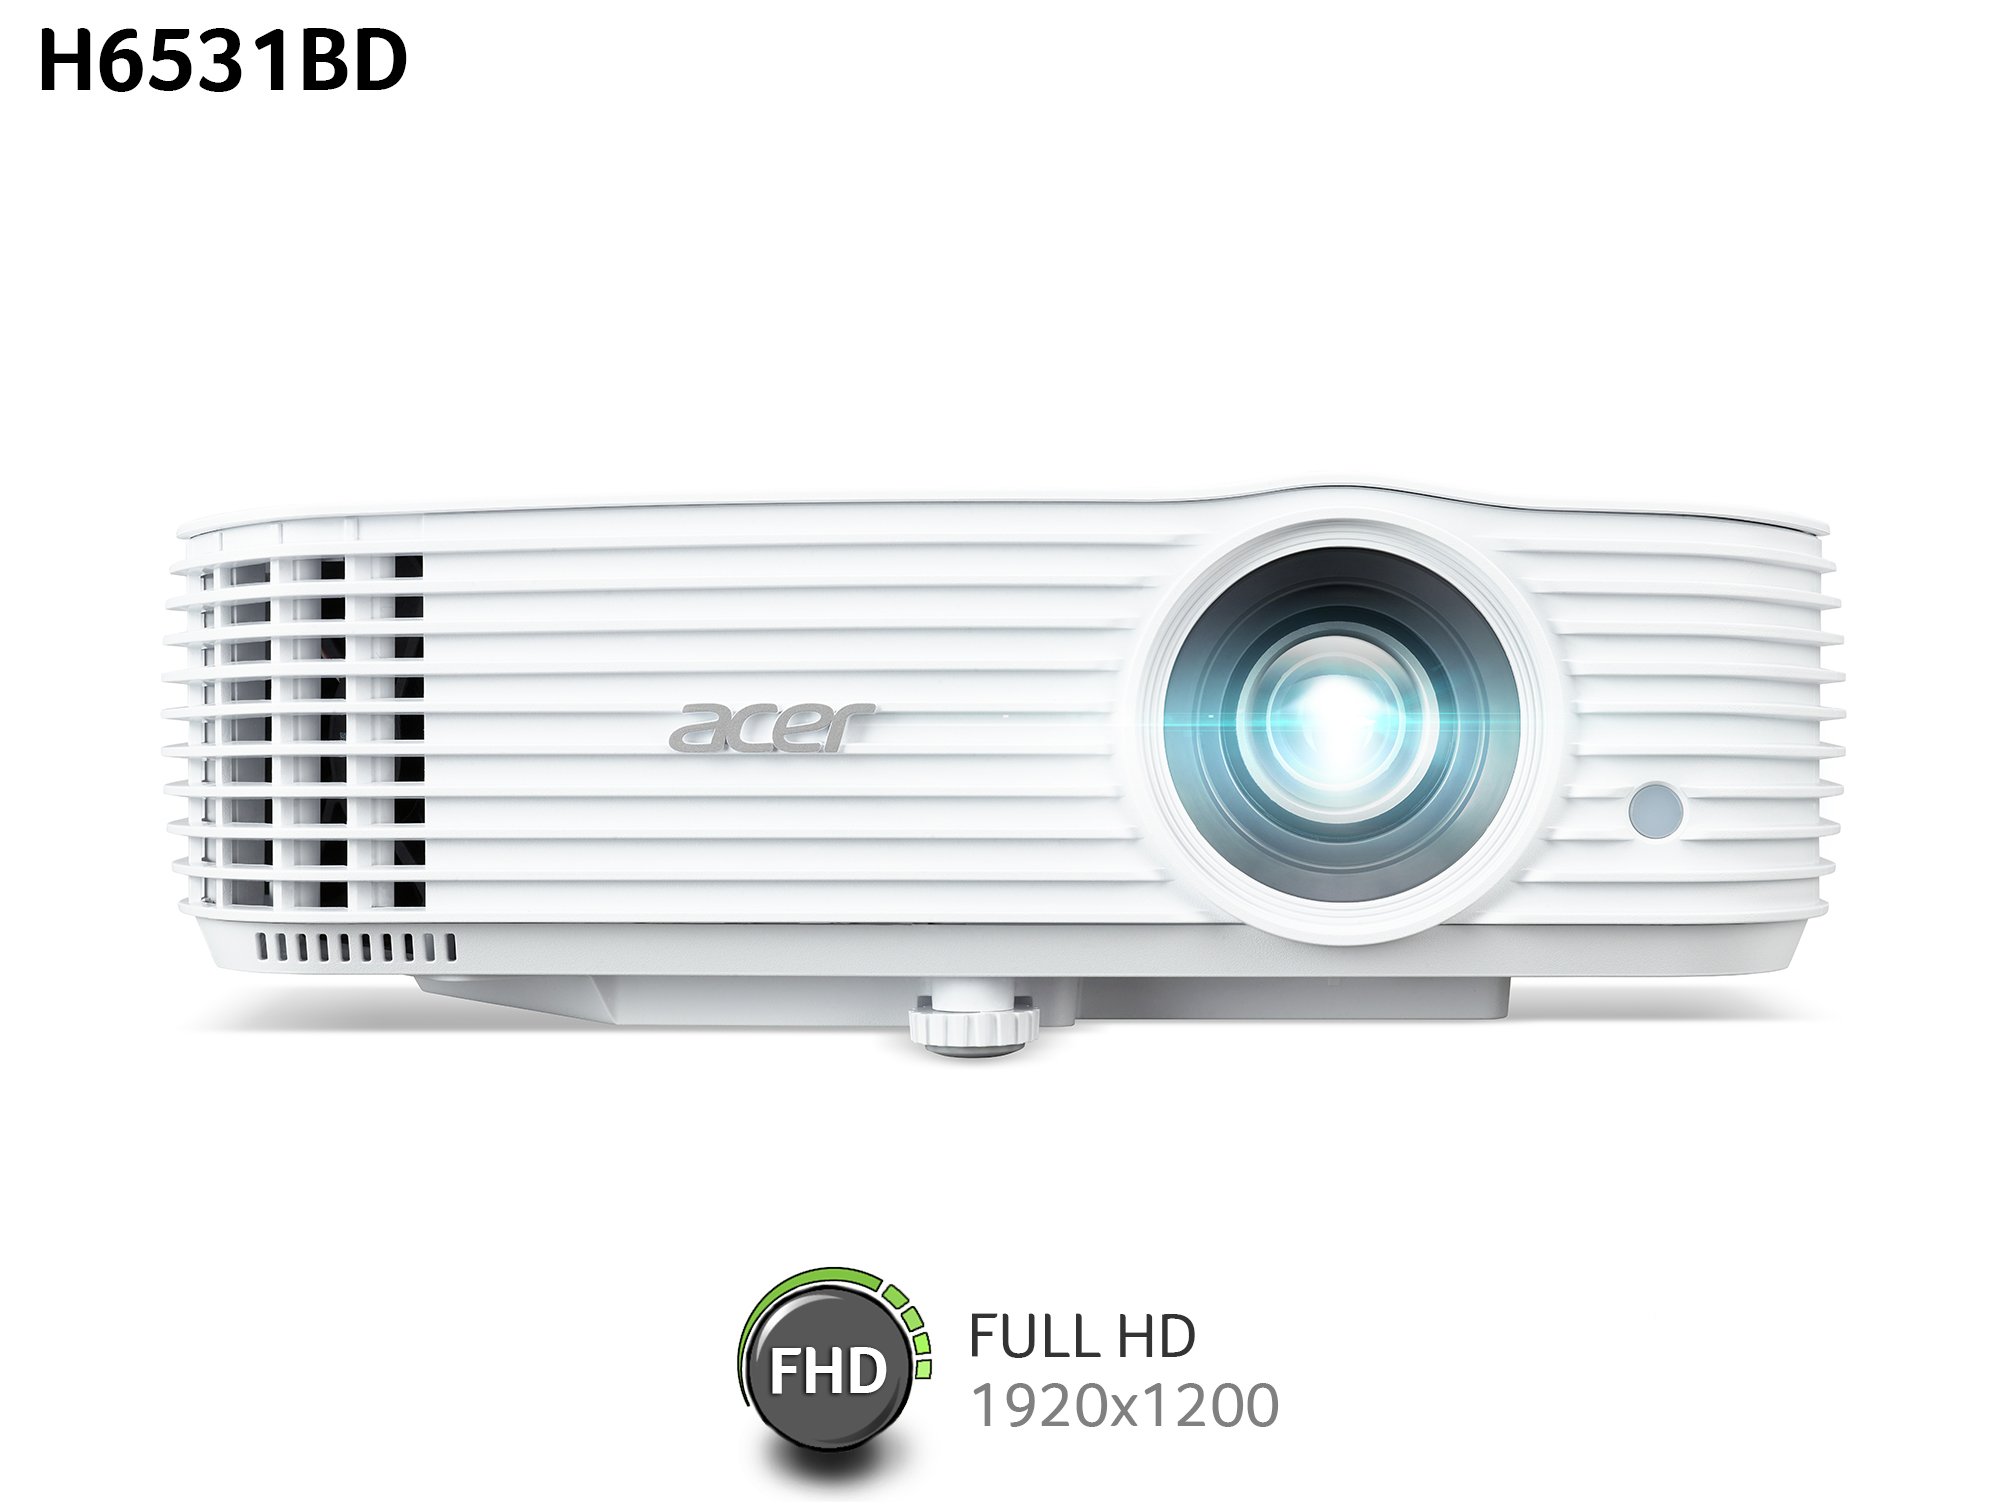 Acer H6531BD FHD Home Cinema Projector Review